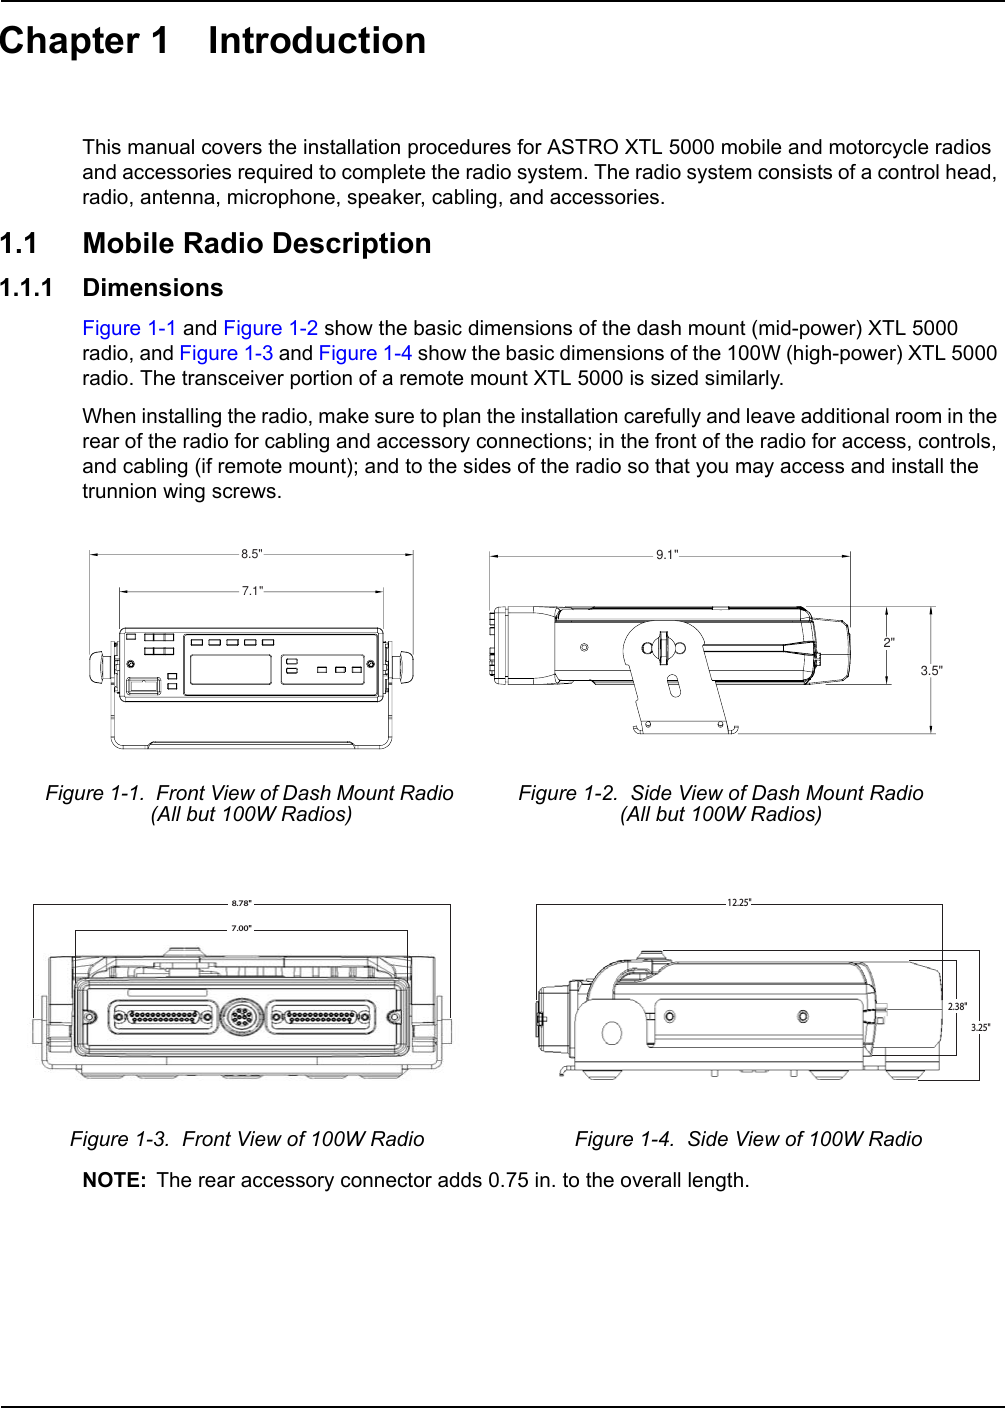 Chapter 1 IntroductionThis manual covers the installation procedures for ASTRO XTL 5000 mobile and motorcycle radios and accessories required to complete the radio system. The radio system consists of a control head, radio, antenna, microphone, speaker, cabling, and accessories.1.1 Mobile Radio Description1.1.1 DimensionsFigure 1-1 and Figure 1-2 show the basic dimensions of the dash mount (mid-power) XTL 5000 radio, and Figure 1-3 and Figure 1-4 show the basic dimensions of the 100W (high-power) XTL 5000 radio. The transceiver portion of a remote mount XTL 5000 is sized similarly. When installing the radio, make sure to plan the installation carefully and leave additional room in the rear of the radio for cabling and accessory connections; in the front of the radio for access, controls, and cabling (if remote mount); and to the sides of the radio so that you may access and install the trunnion wing screws.NOTE: The rear accessory connector adds 0.75 in. to the overall length.Figure 1-1.  Front View of Dash Mount Radio (All but 100W Radios)Figure 1-2.  Side View of Dash Mount Radio (All but 100W Radios)Figure 1-3.  Front View of 100W Radio Figure 1-4.  Side View of 100W Radio8.5&quot;7.1&quot;9.1&quot;2&quot;3.5&quot;7.00&quot;8.78&quot;12.25&quot;3.25&quot;2.38&quot;